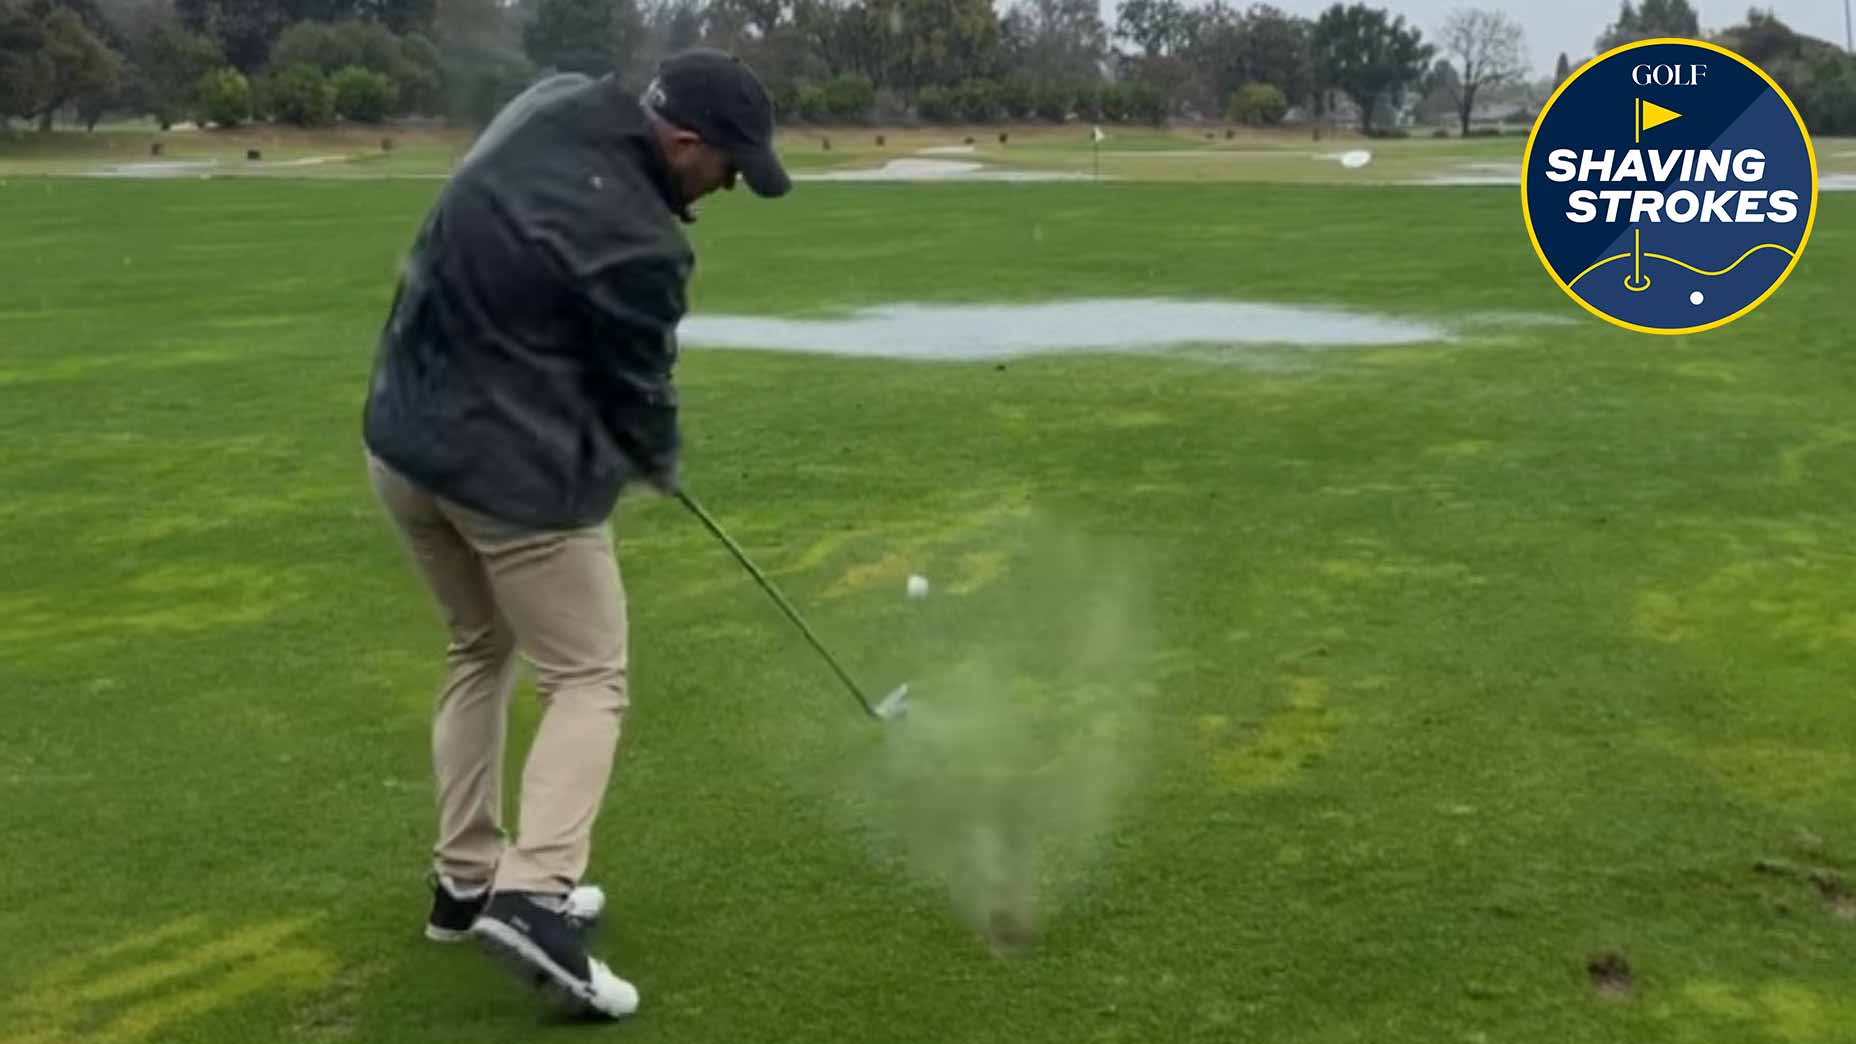 How to play golf in the cold: 8 tips for conquering winter golf